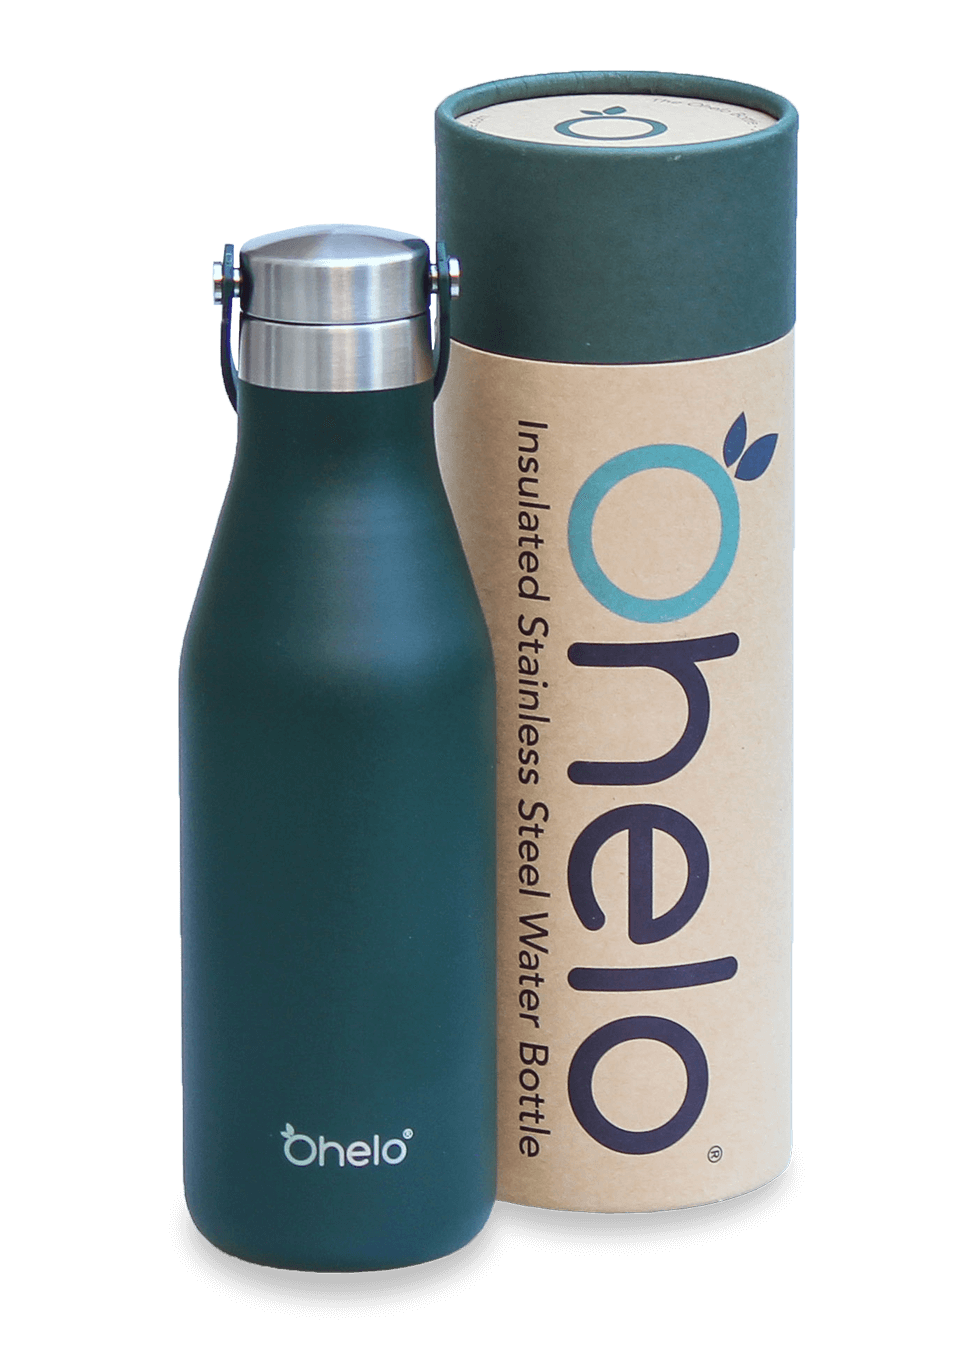 Ohelo vacuum insulated water bottle in British Racing Green